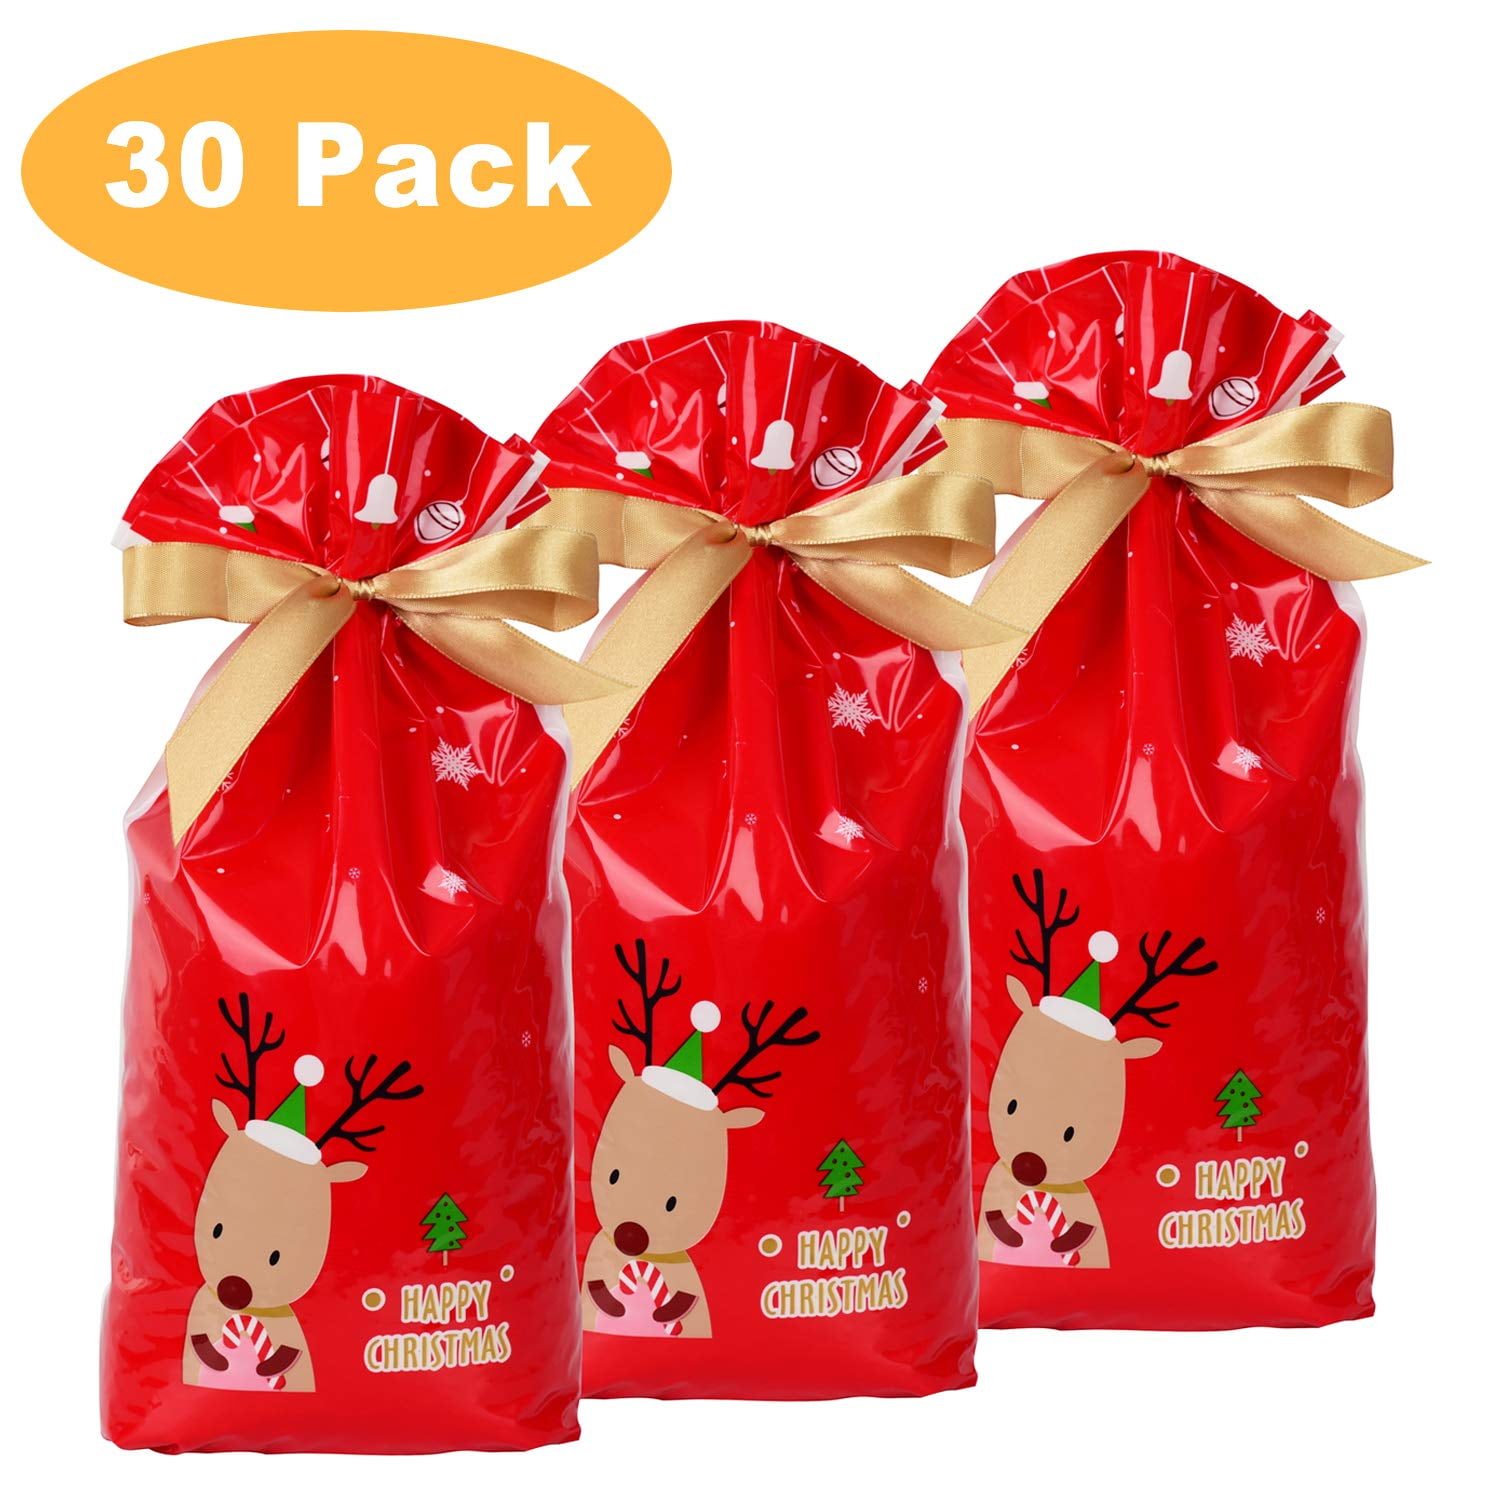 Details about   2020 NEW White Christmas Deer Bear Party Gift Drawstring Packing Stocking Bags